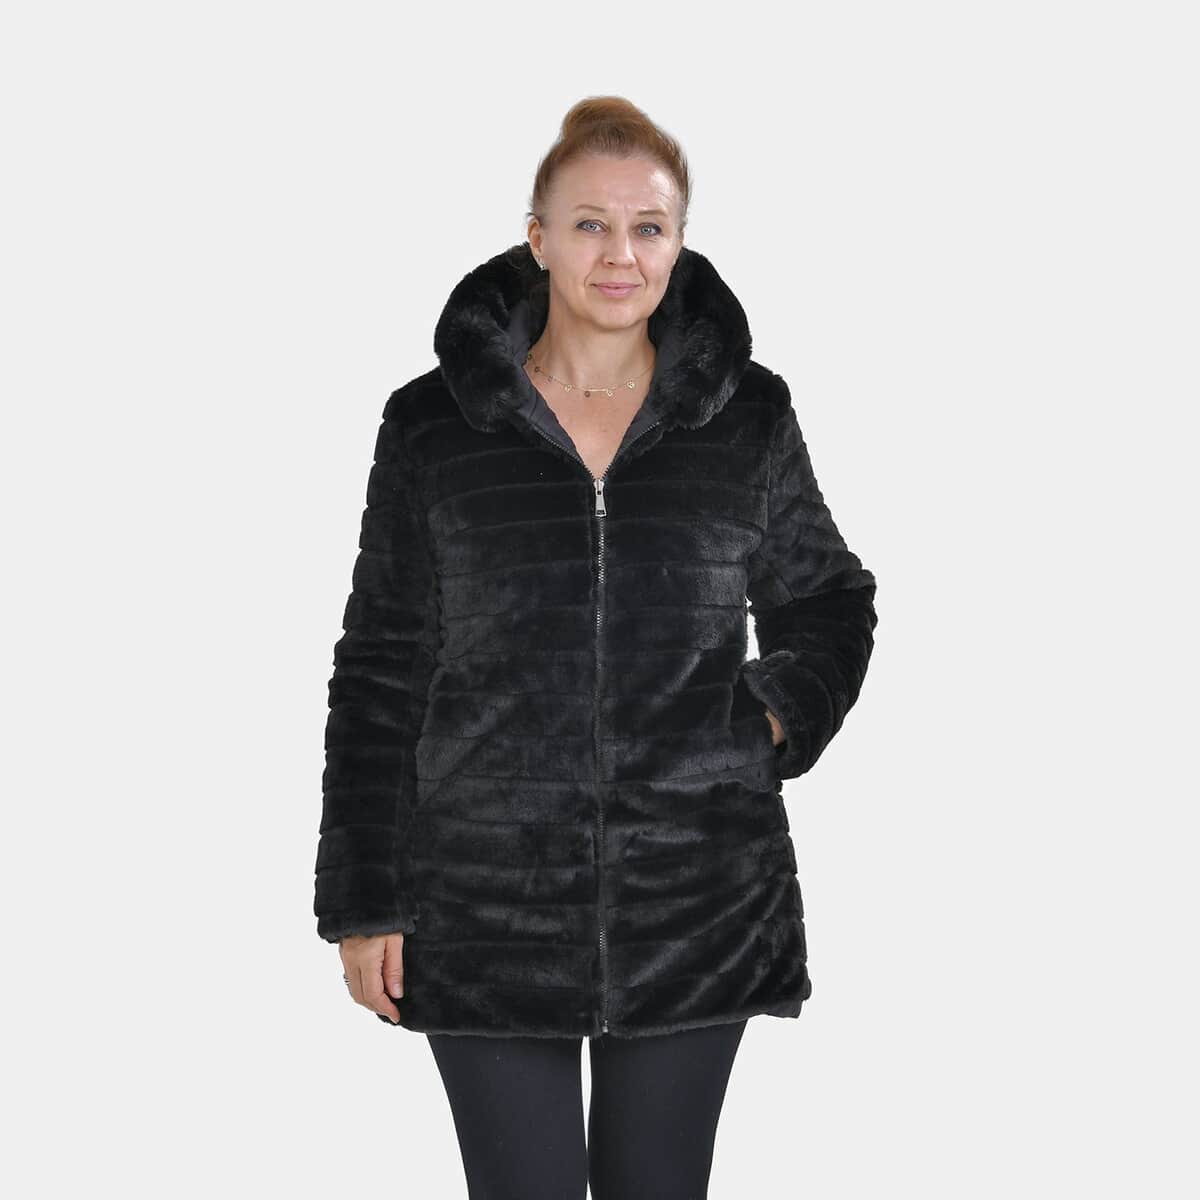 Tamsy Black Reversible Faux Fur and Puffer Jacket with Hood - M image number 5